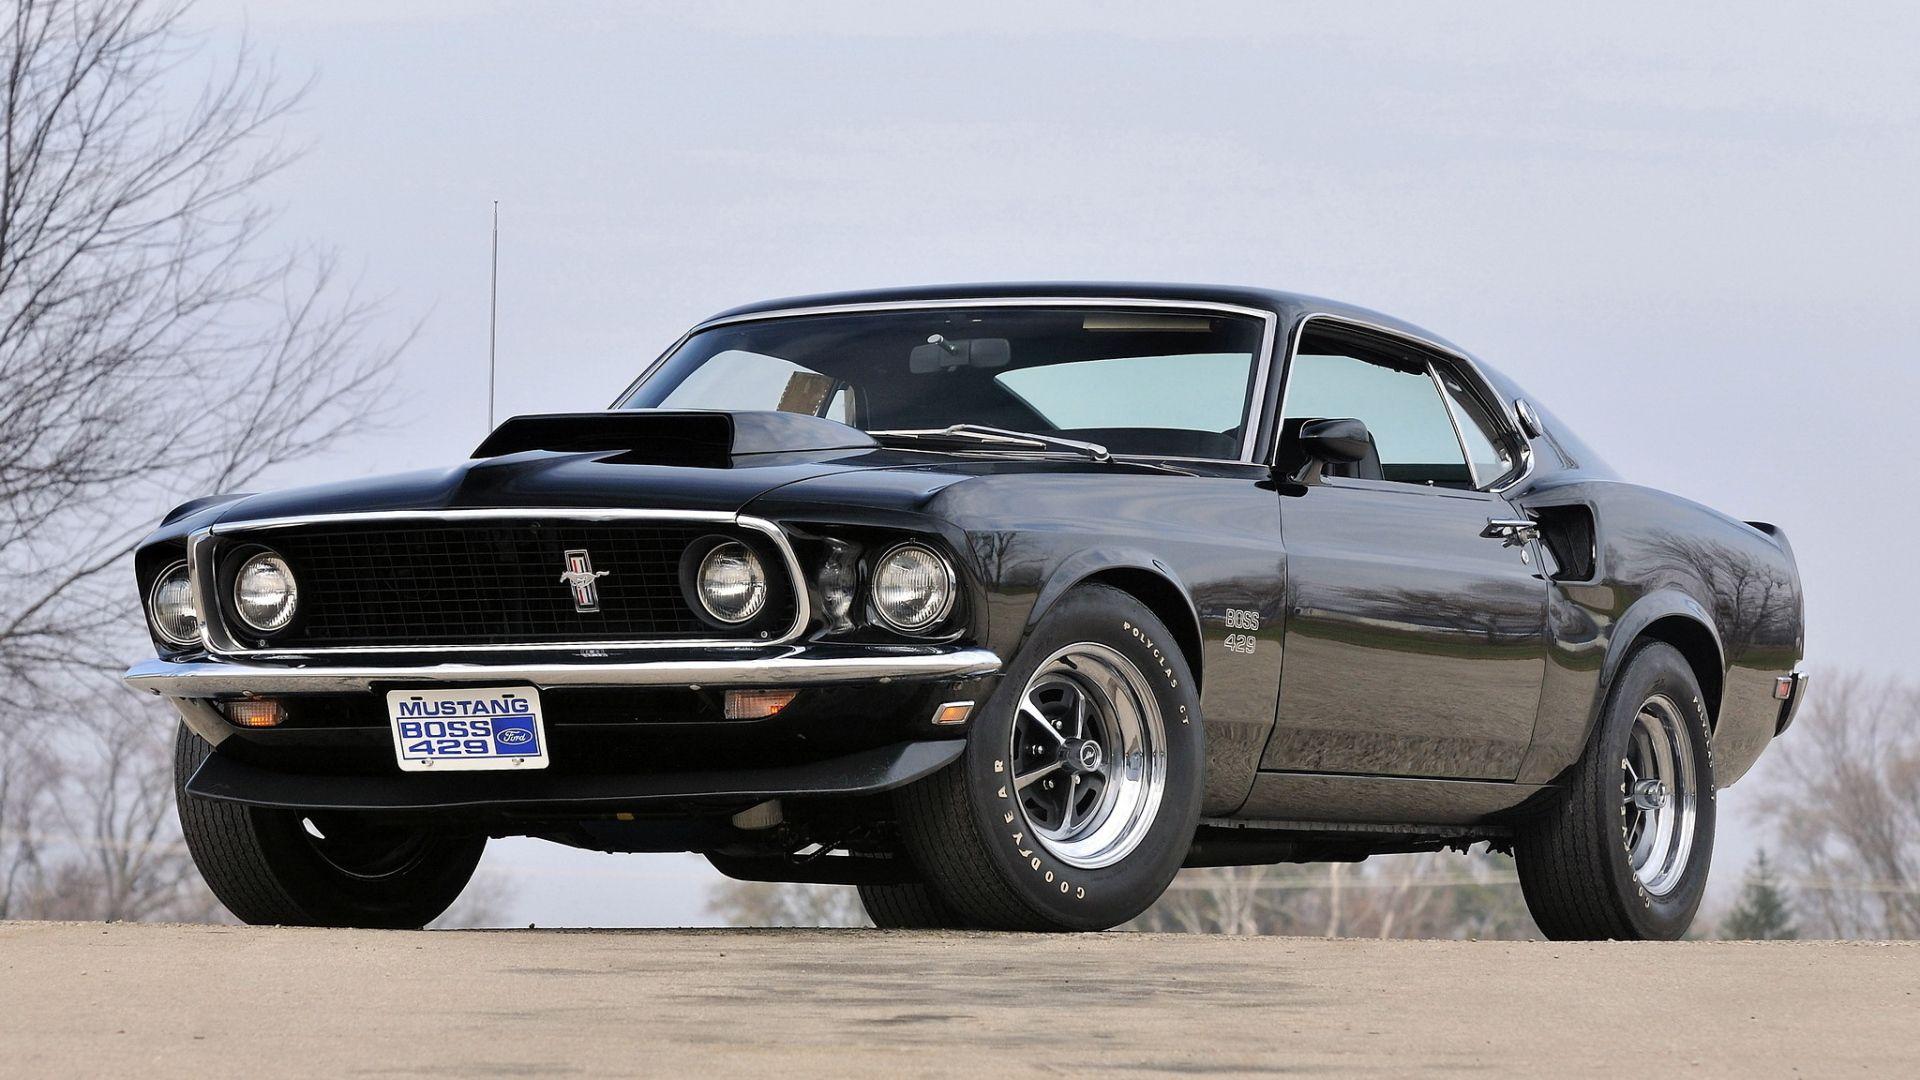 Download Wallpaper 1920x1080 Muscle car, Ford boss, 429